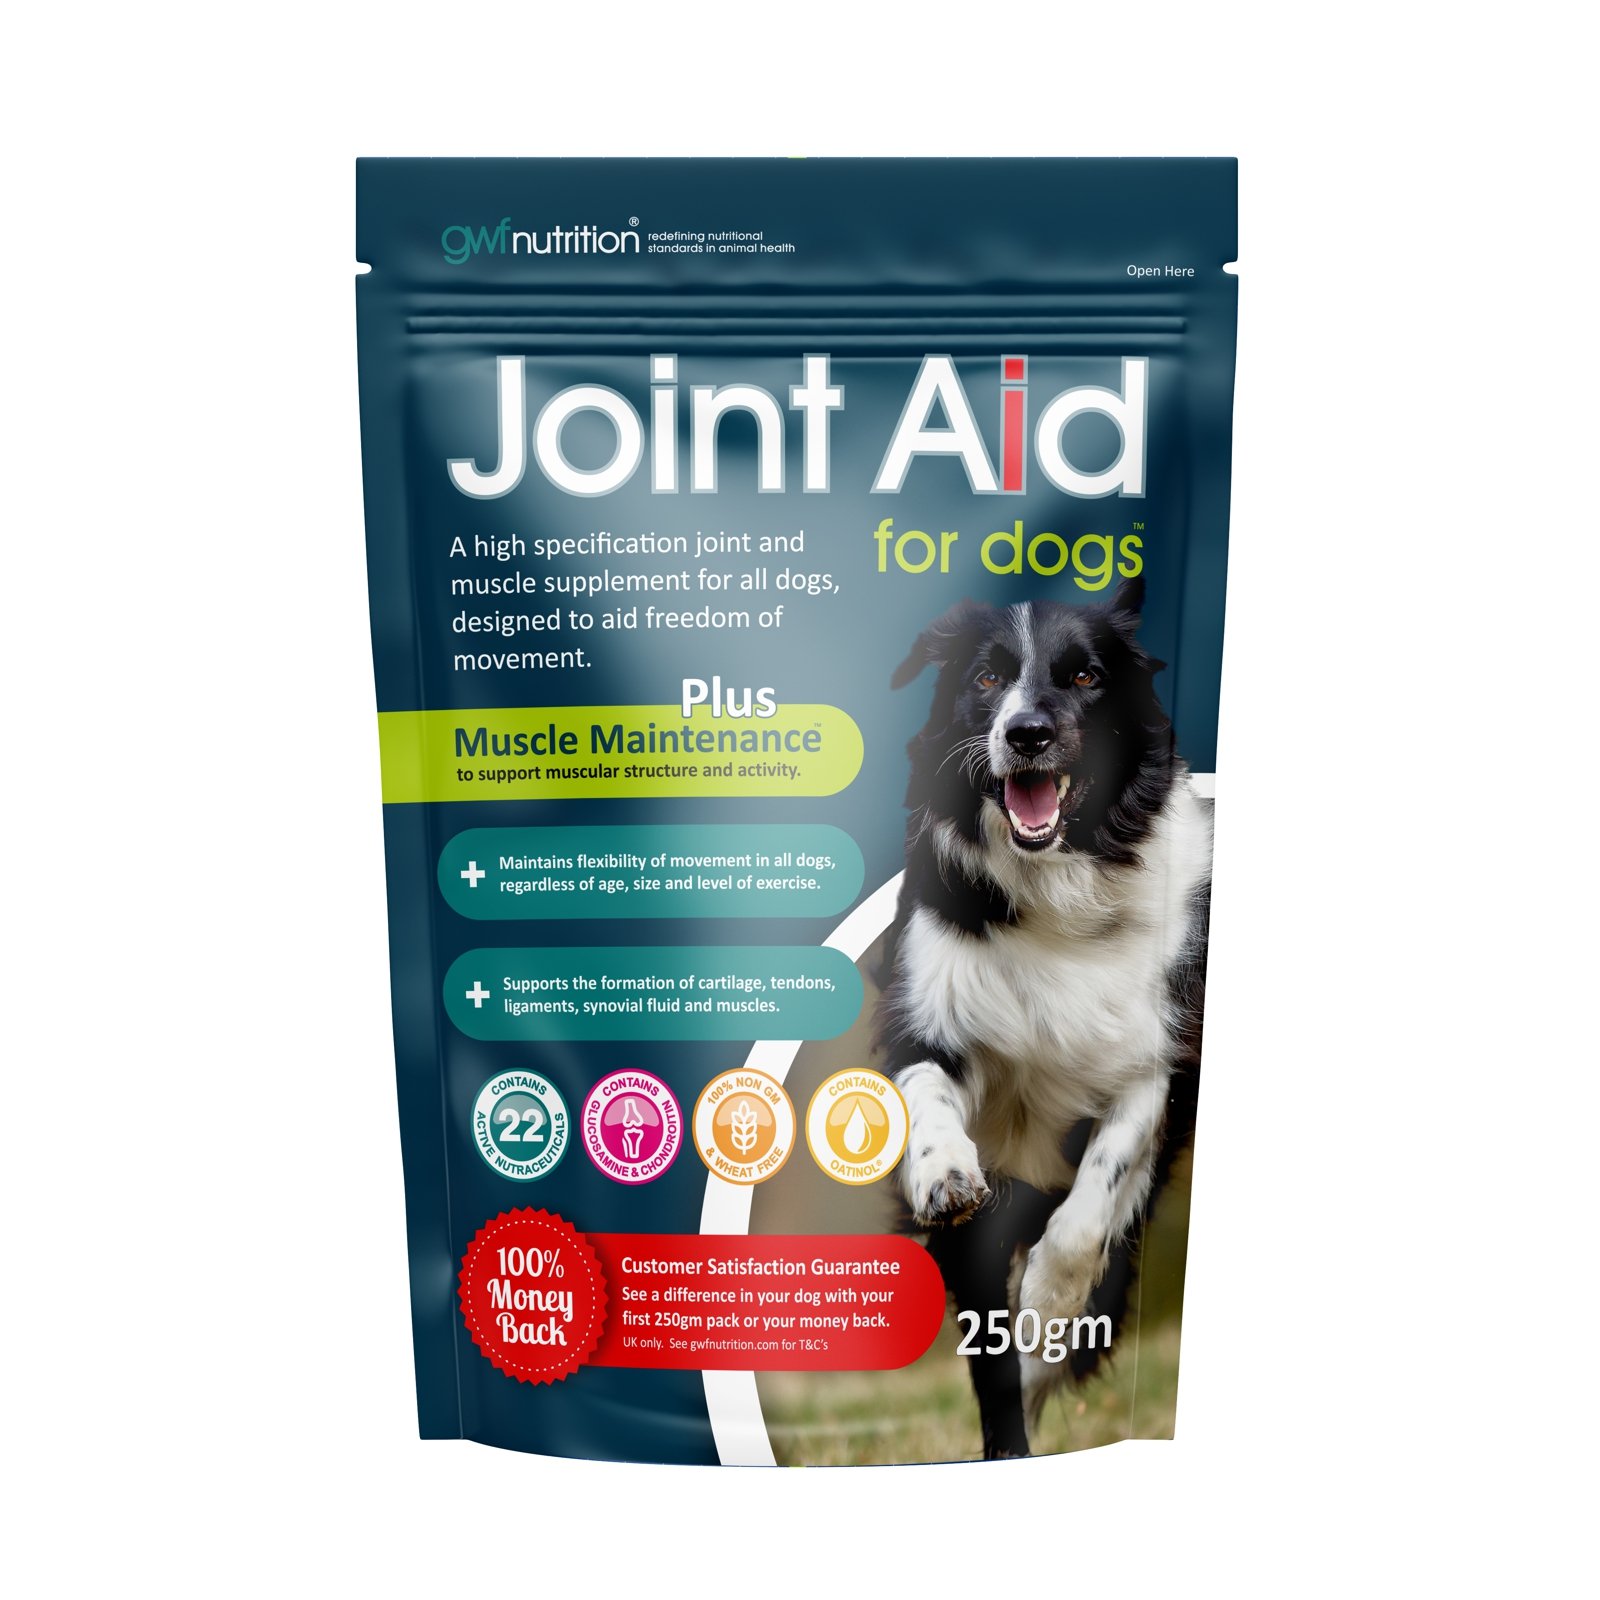 Canine-Joint-Aid-for-Dogs-250gm-Front.jpg